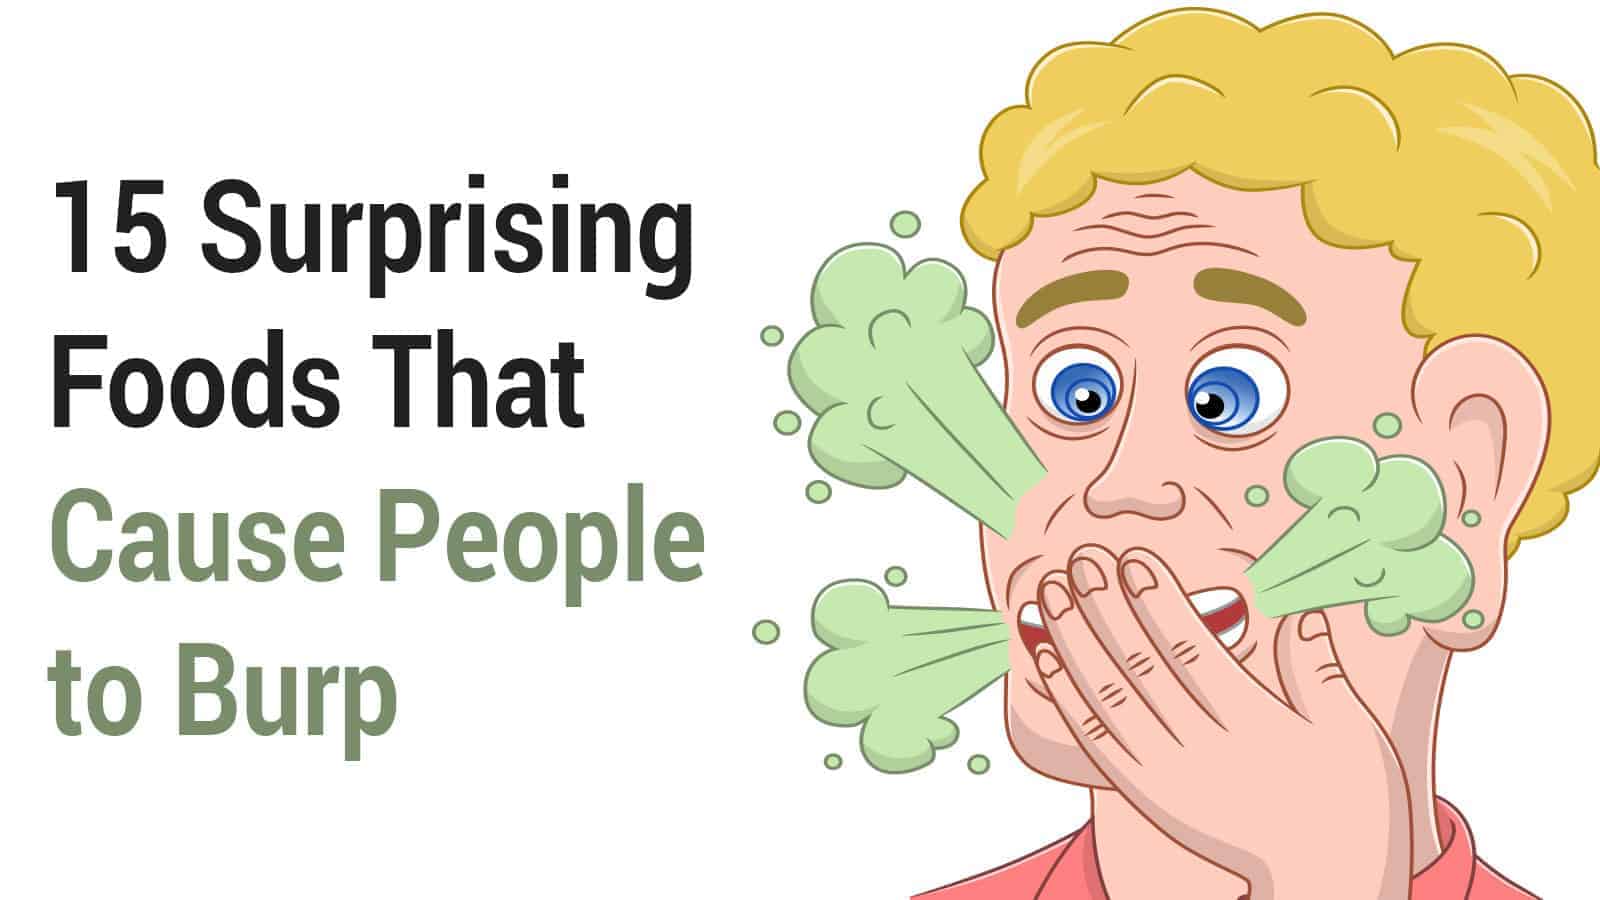 15 Surprising Foods That Cause People to Burp